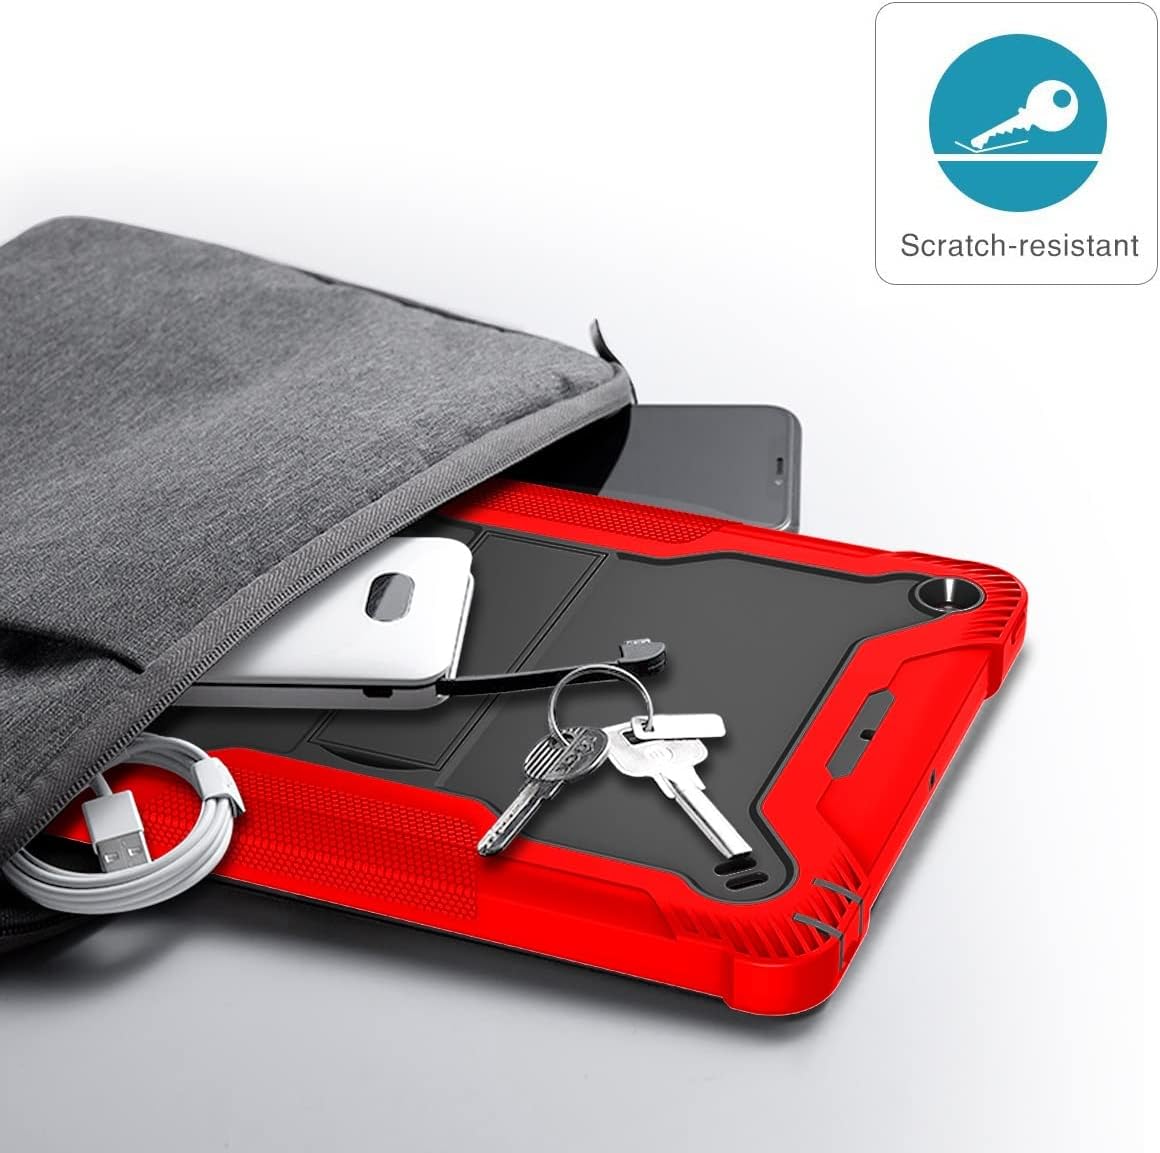 Apple iPad 7, 8, 9 (10.2 inch) Red Black Shockproof Rugged Case with Kickstand *Free Shipping*